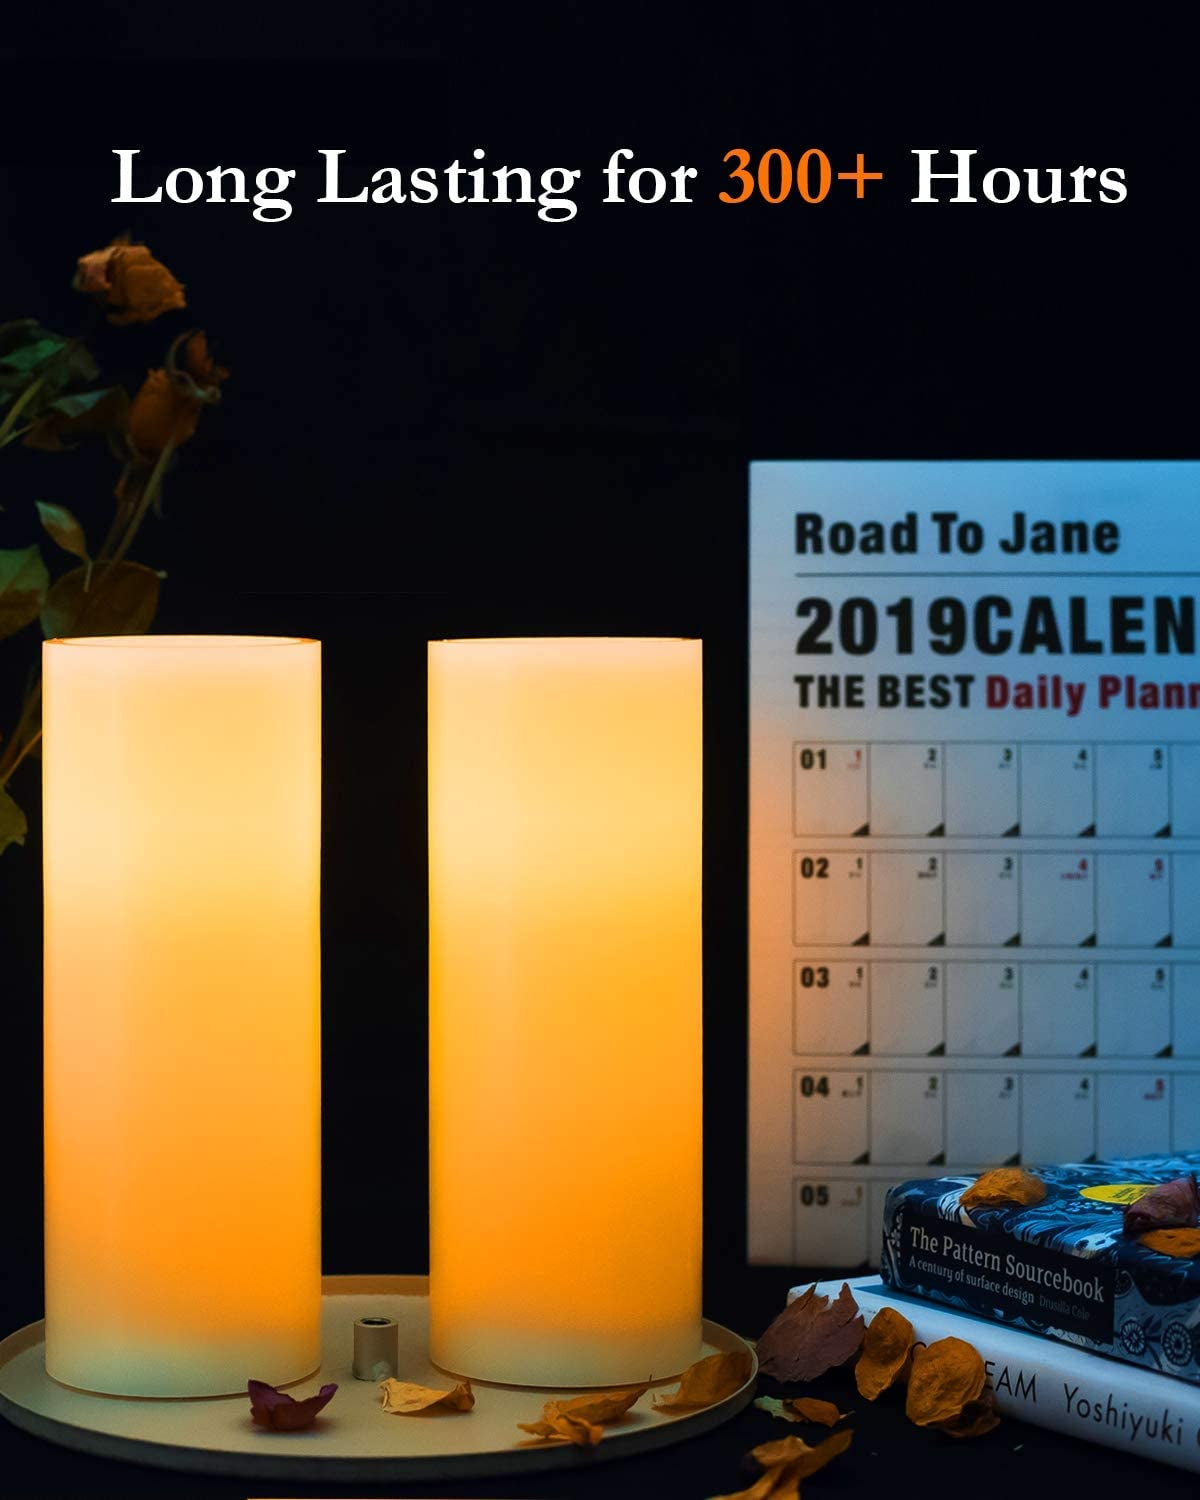 Professional Title: " 9" X 3" Flameless Battery Operated LED Pillar Candles with Timers and Remote Controls - Set of 2, Ivory White Wax, Indoor Use Only"